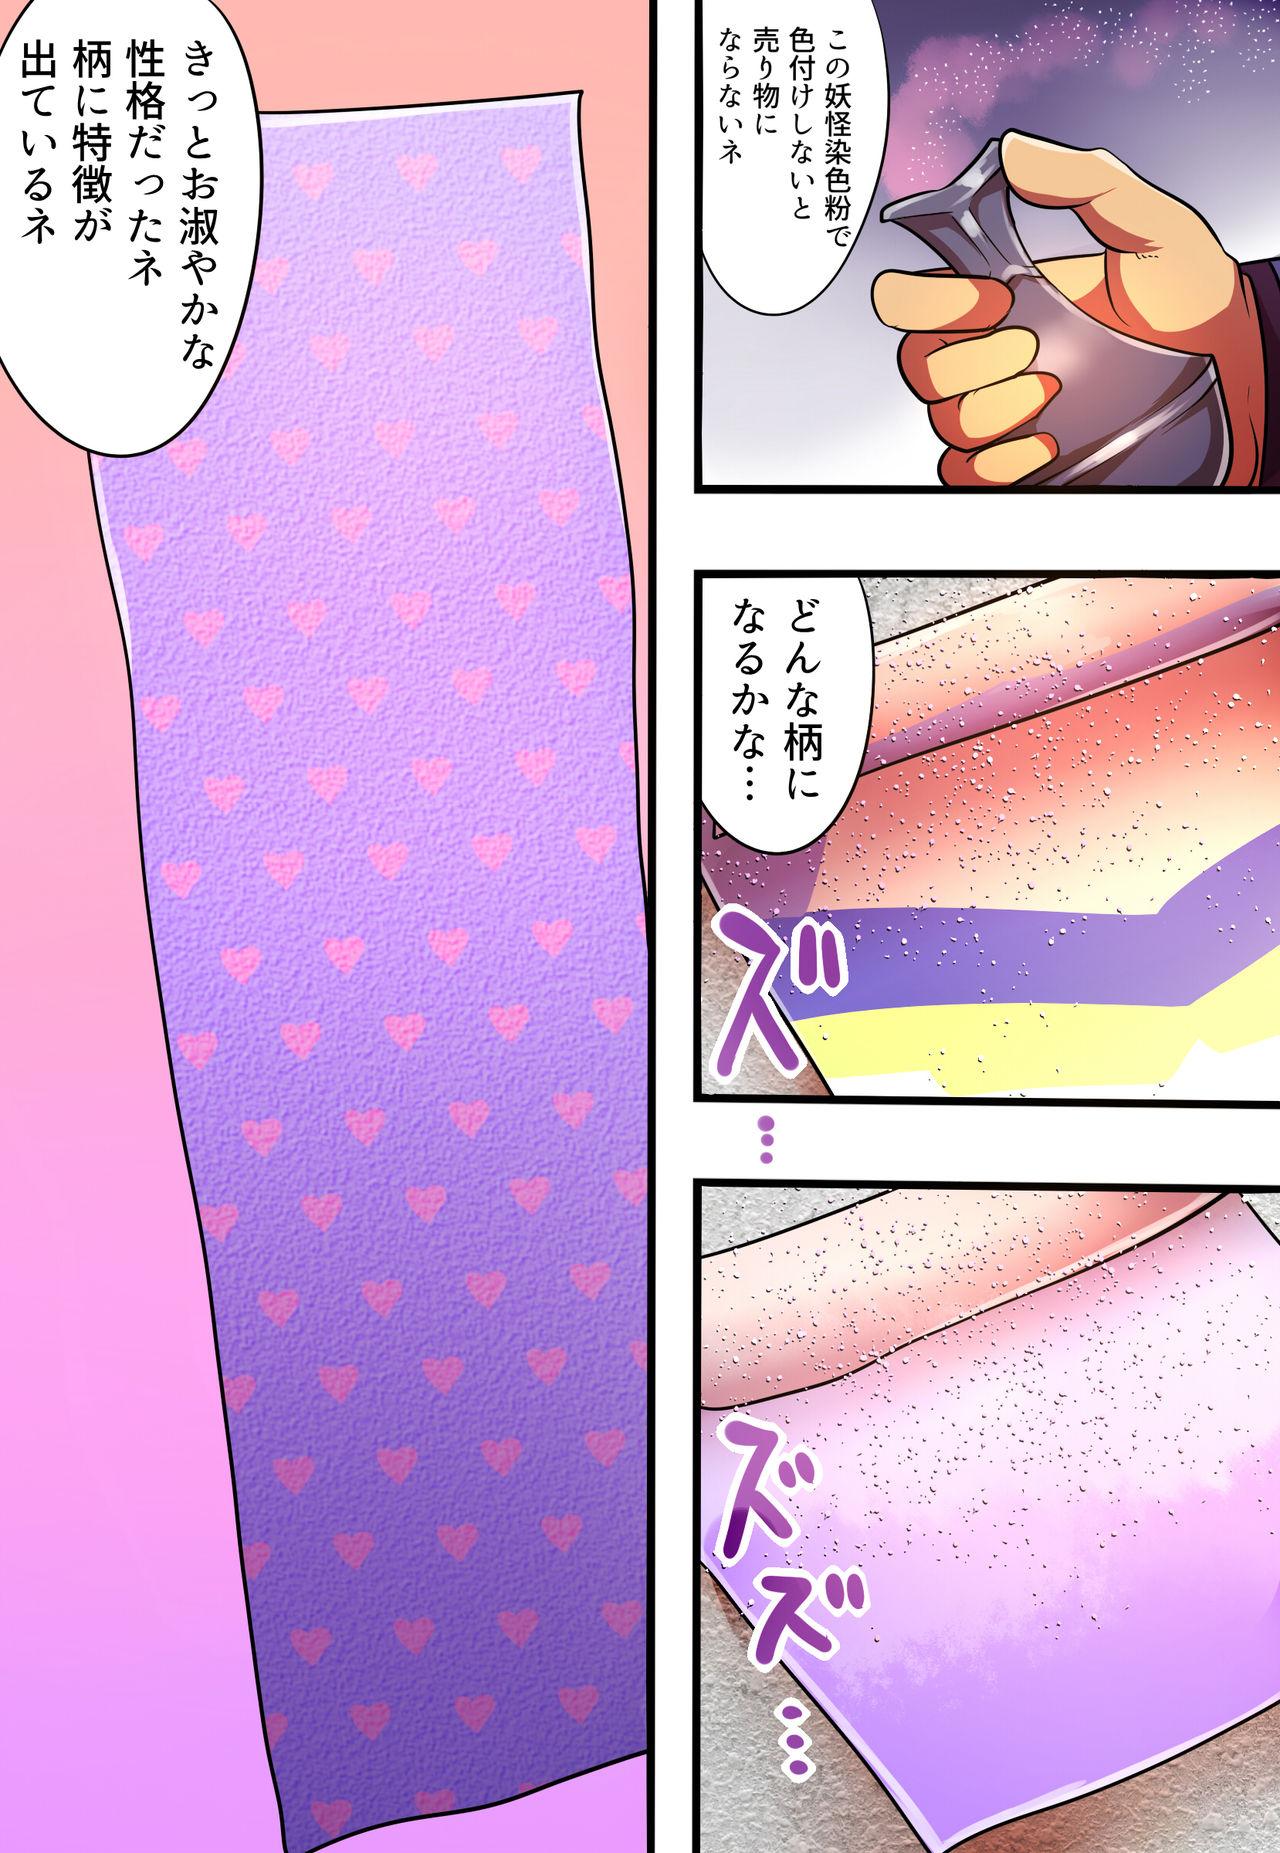 Threesome shinenkan Comic of Textile-ification ghost storys Oldvsyoung - Page 4